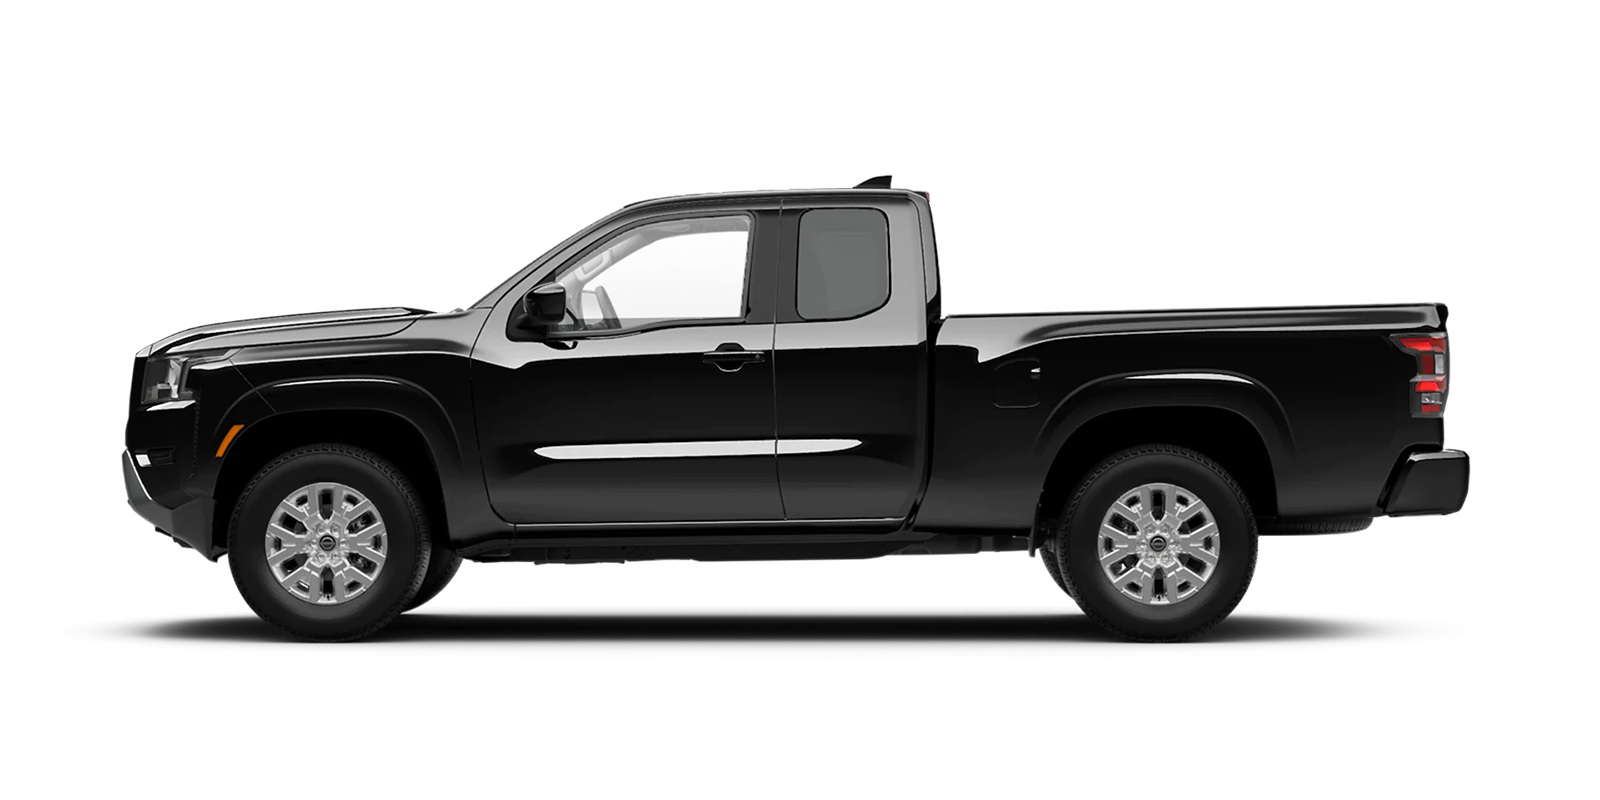 2022 Frontier King Cab SV 4x4 in Super Black | Wallace Nissan of Kingsport in Kingsport TN